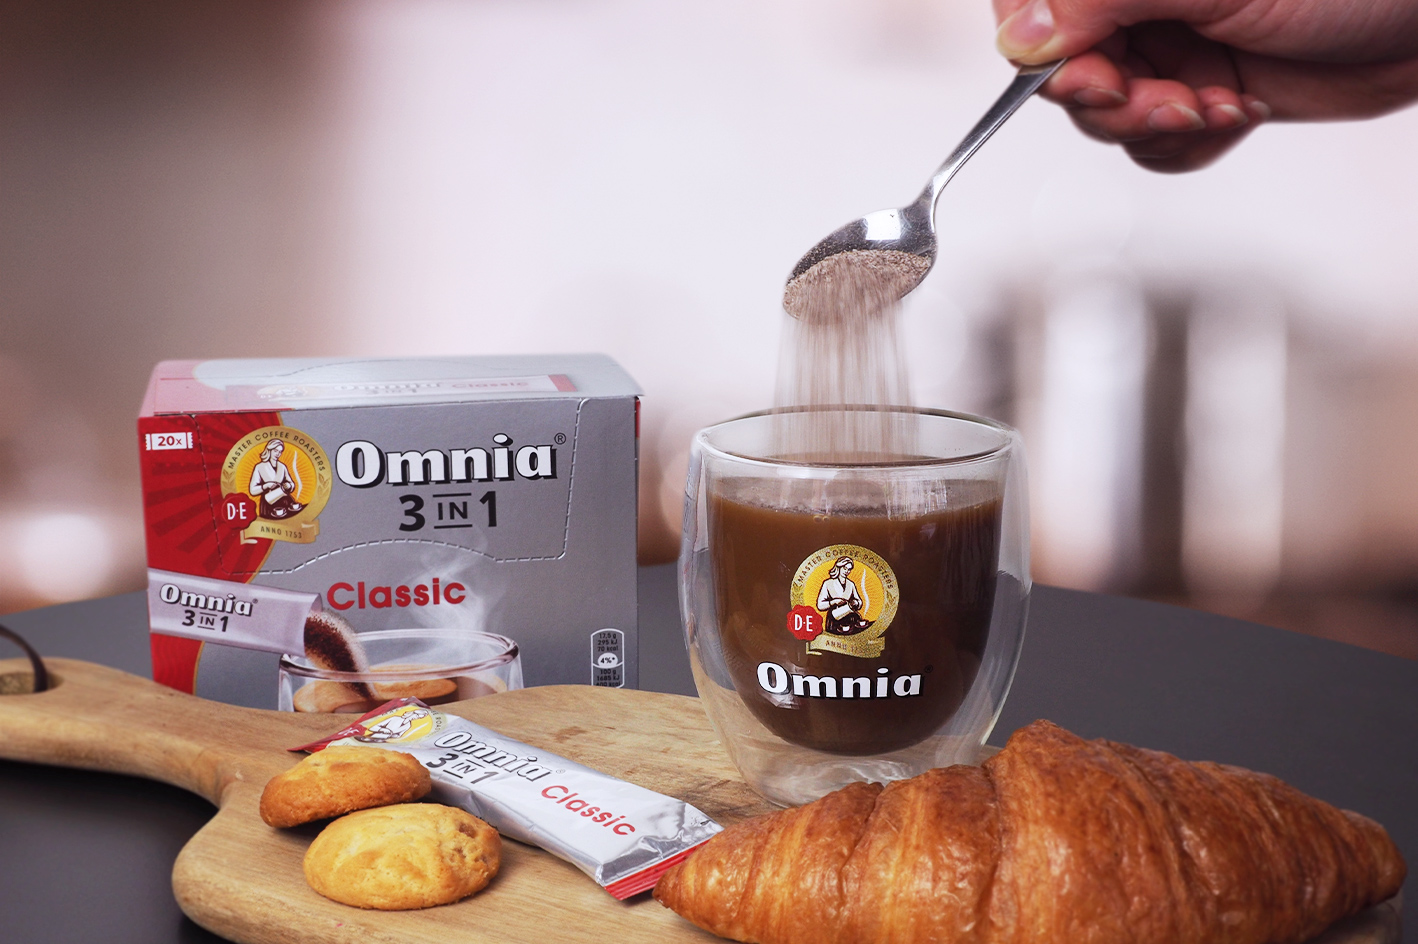 Omnia 3in1 Classic coffee and a croissant